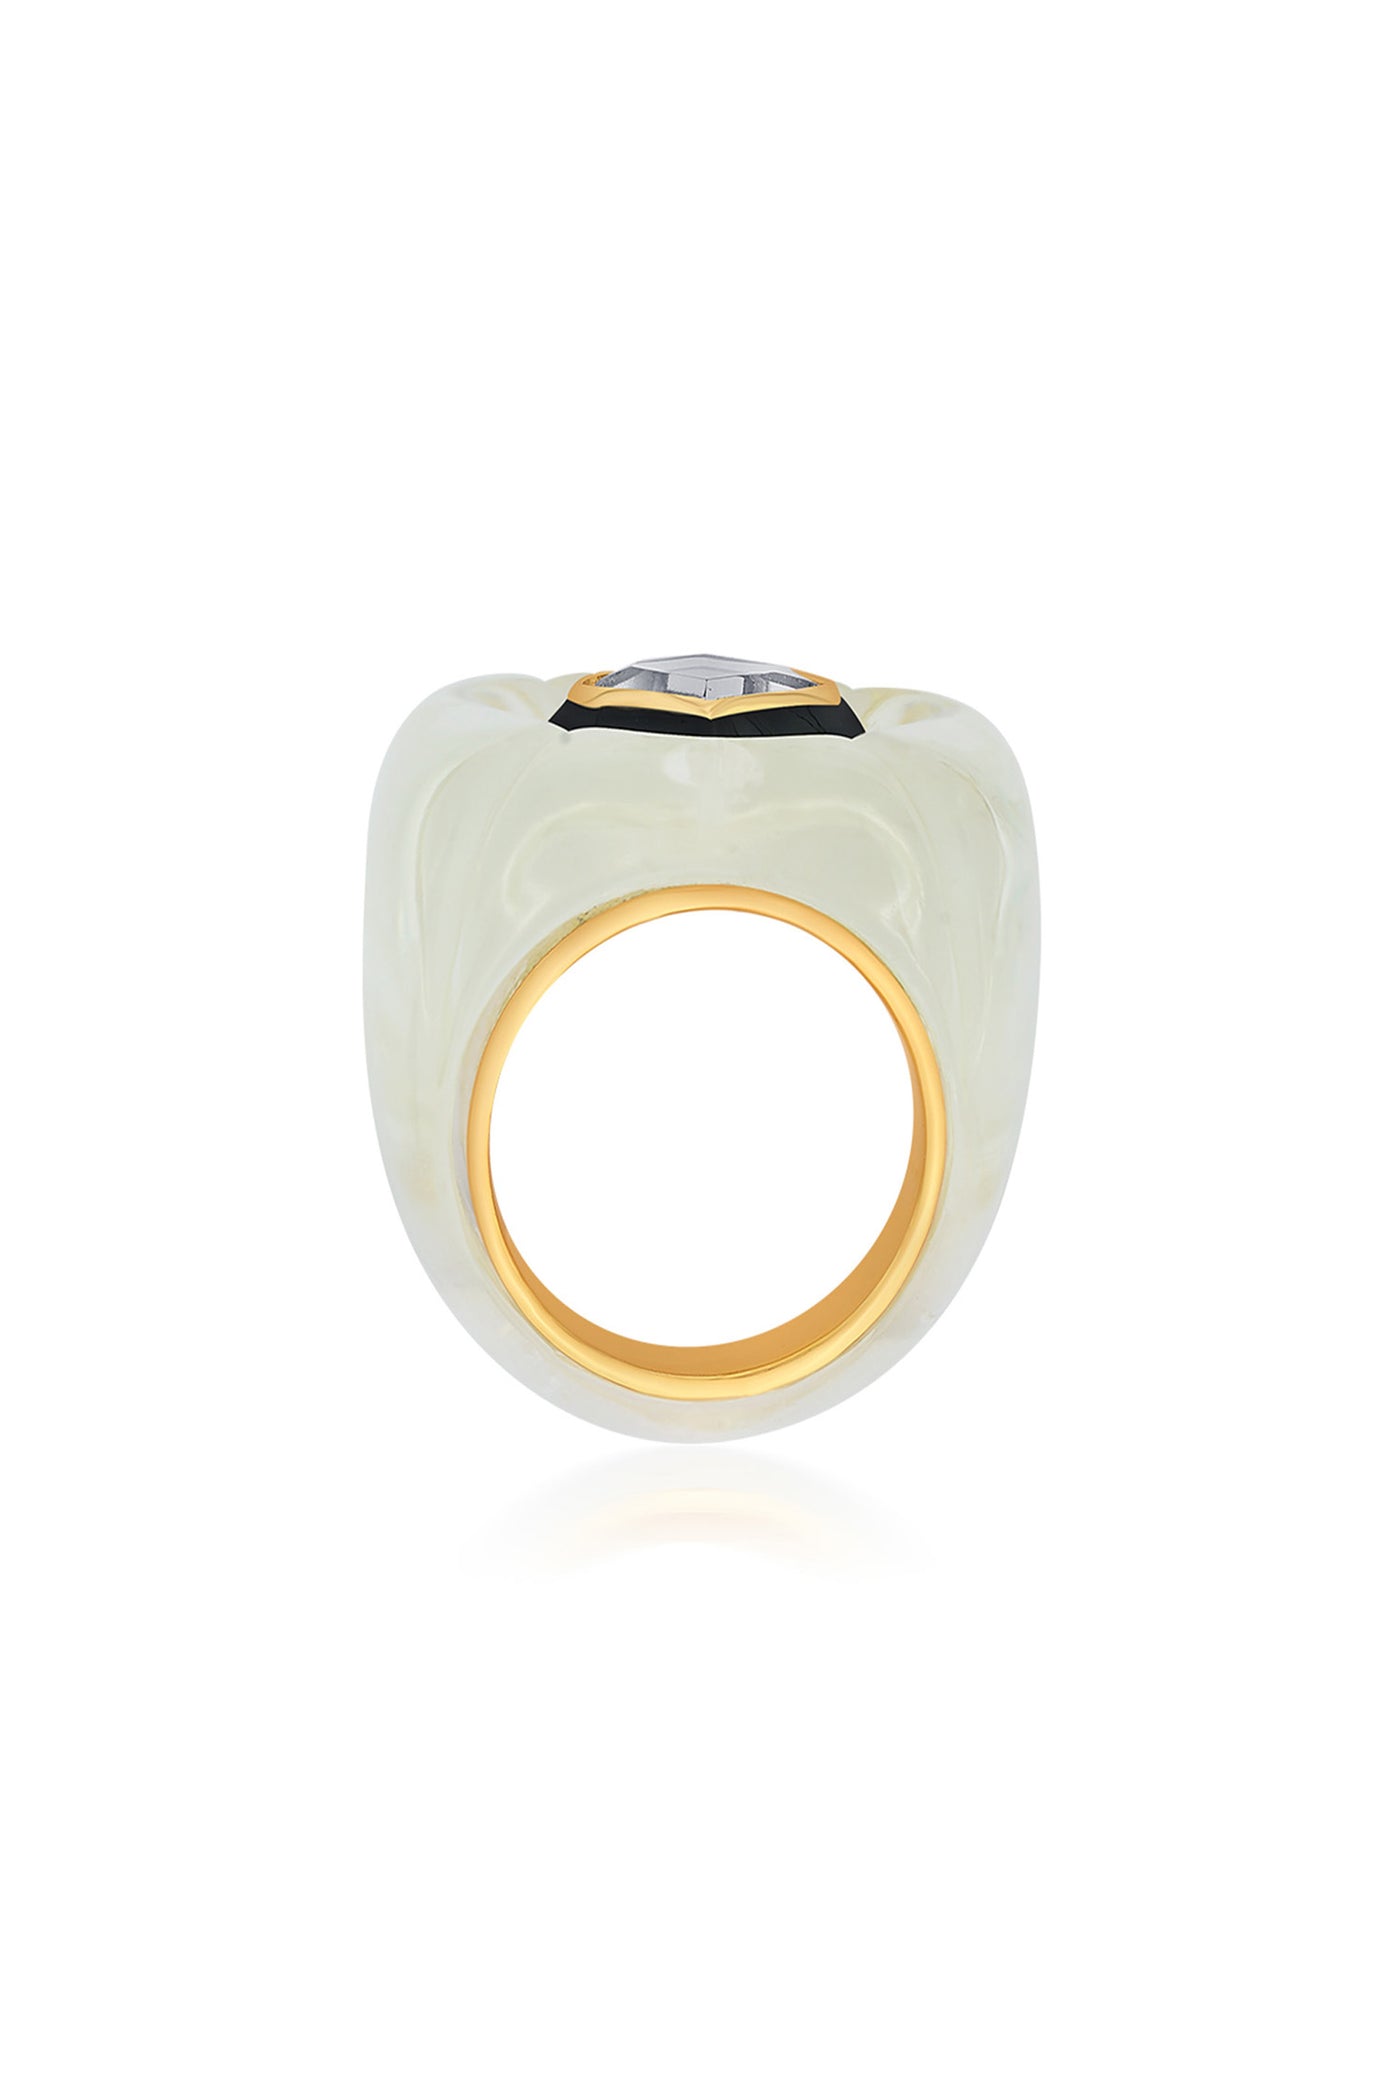 Isharya Bougie Mirror Resin Chubby Ring In 18Kt Gold Plated fashion jewellery online shopping melange singapore indian designer wear